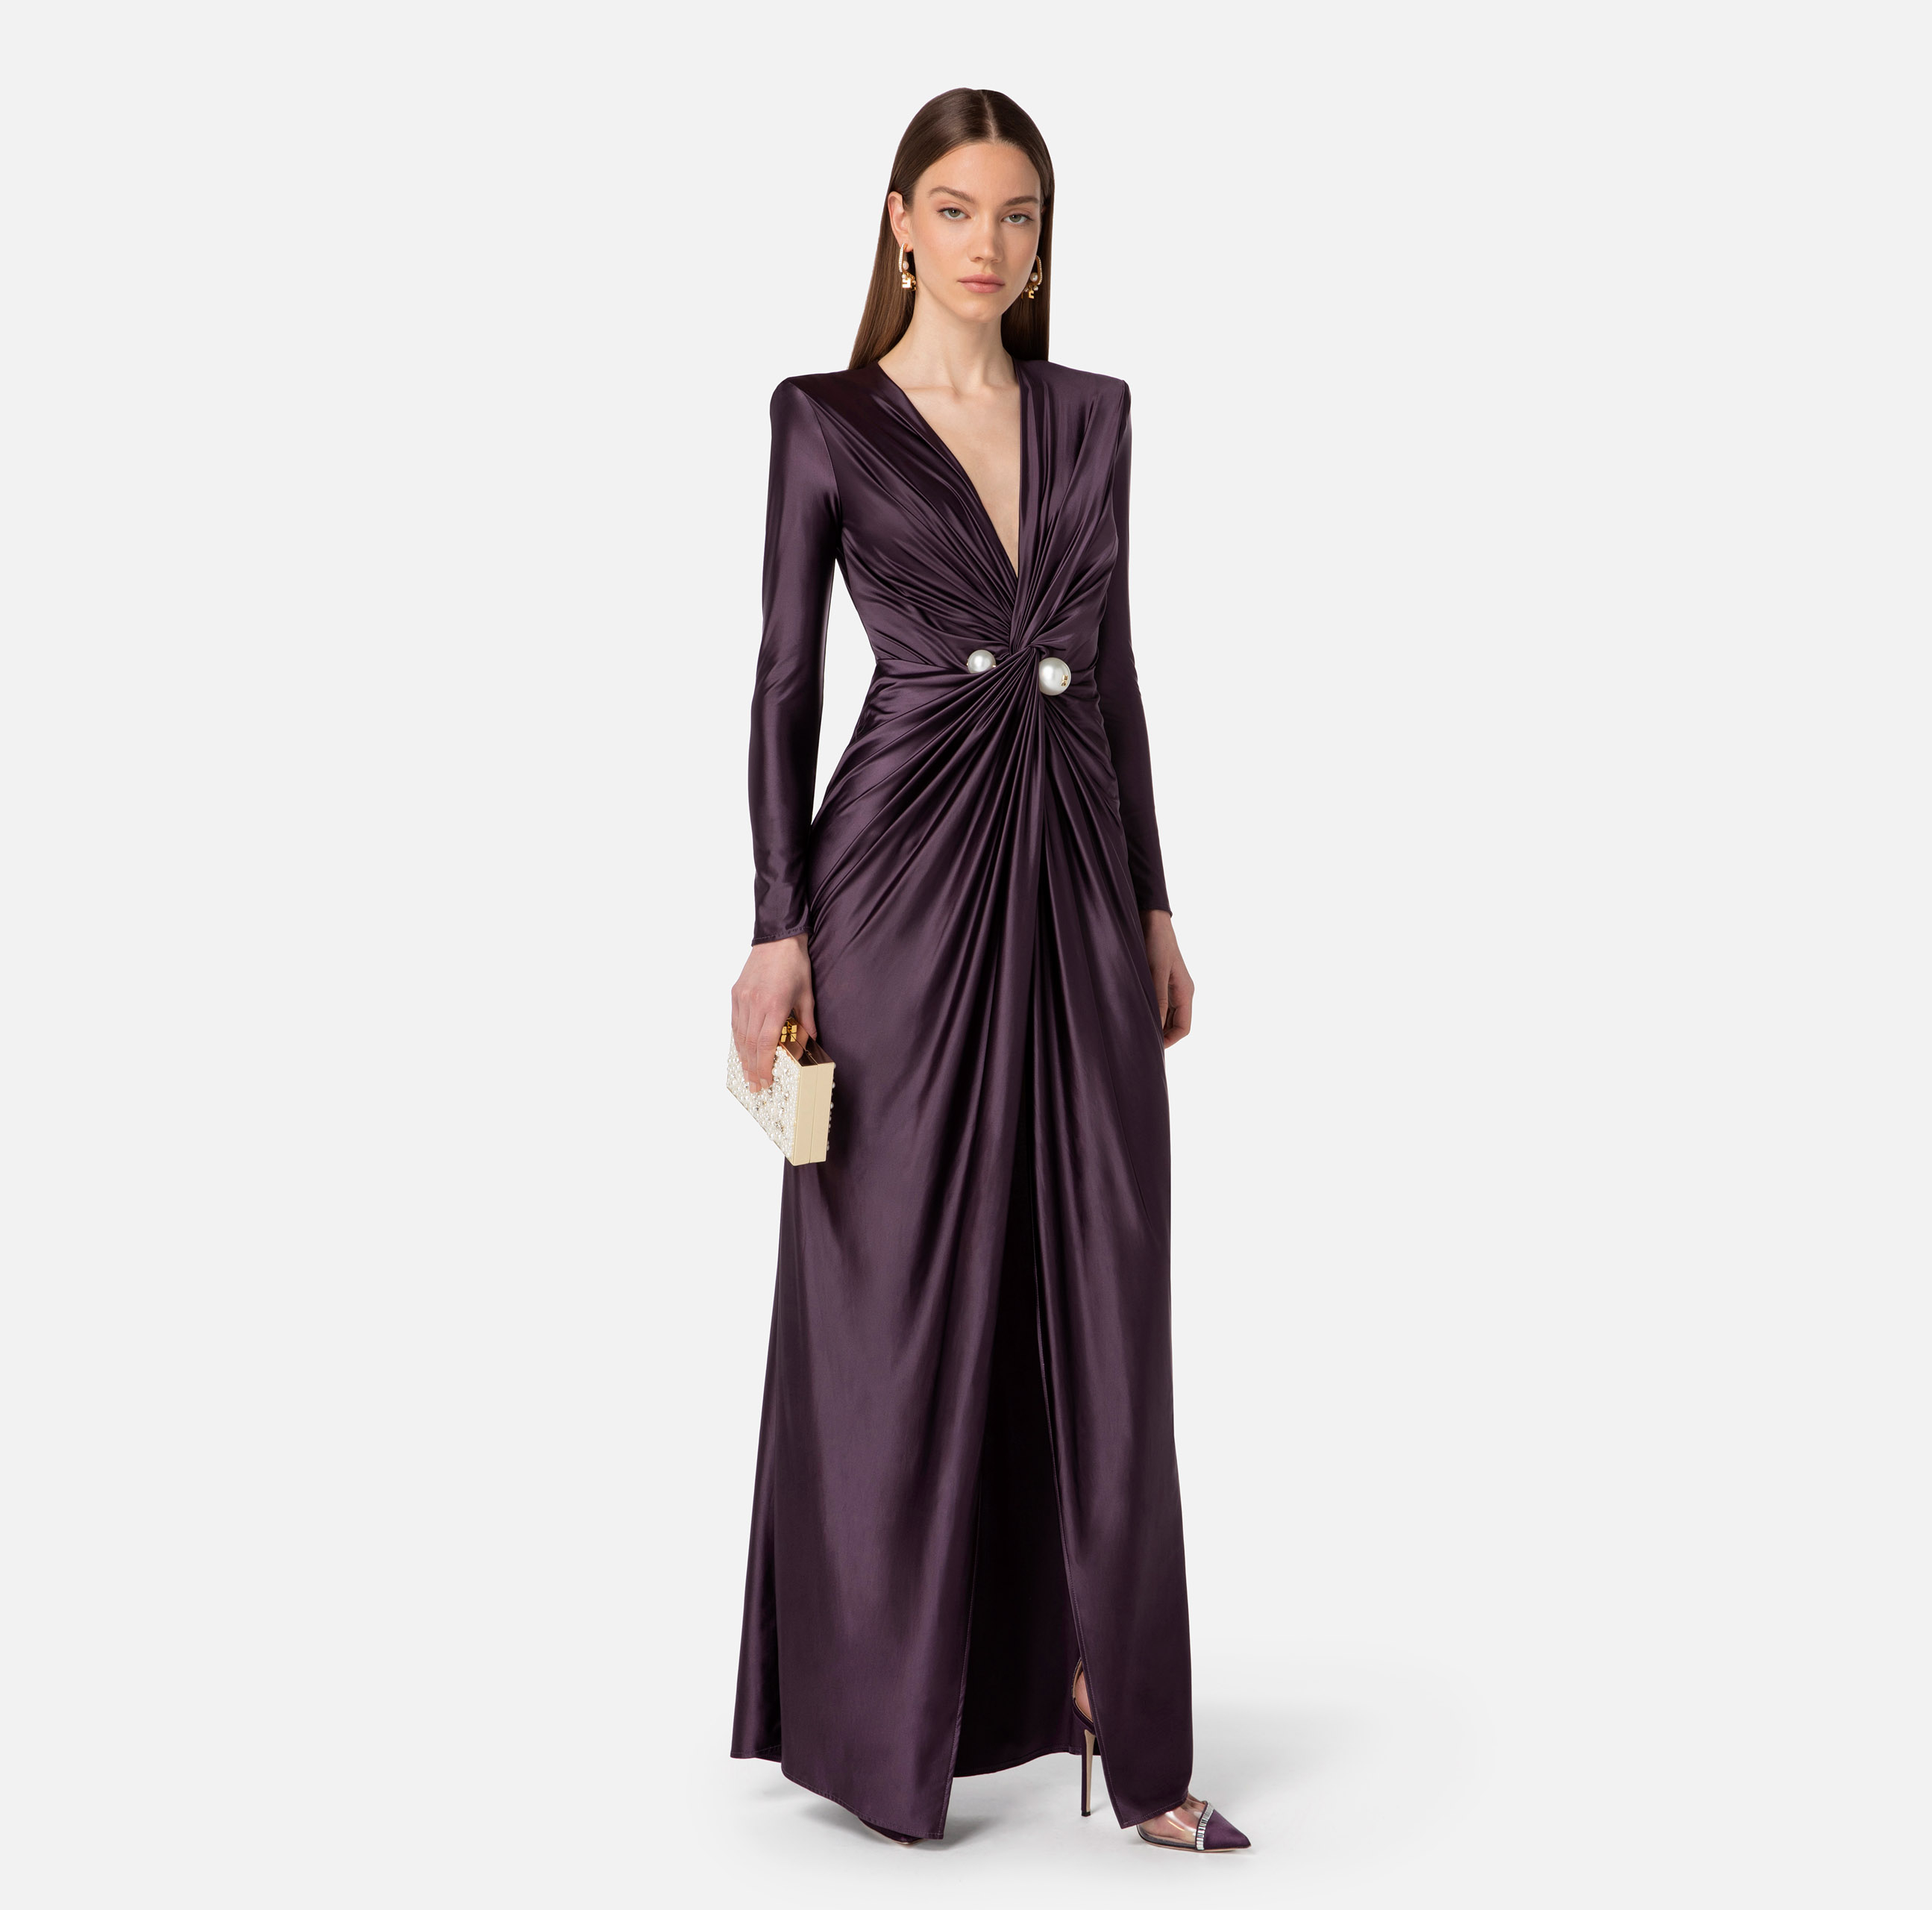 Red Carpet dress in Lycra with pearls - Elisabetta Franchi